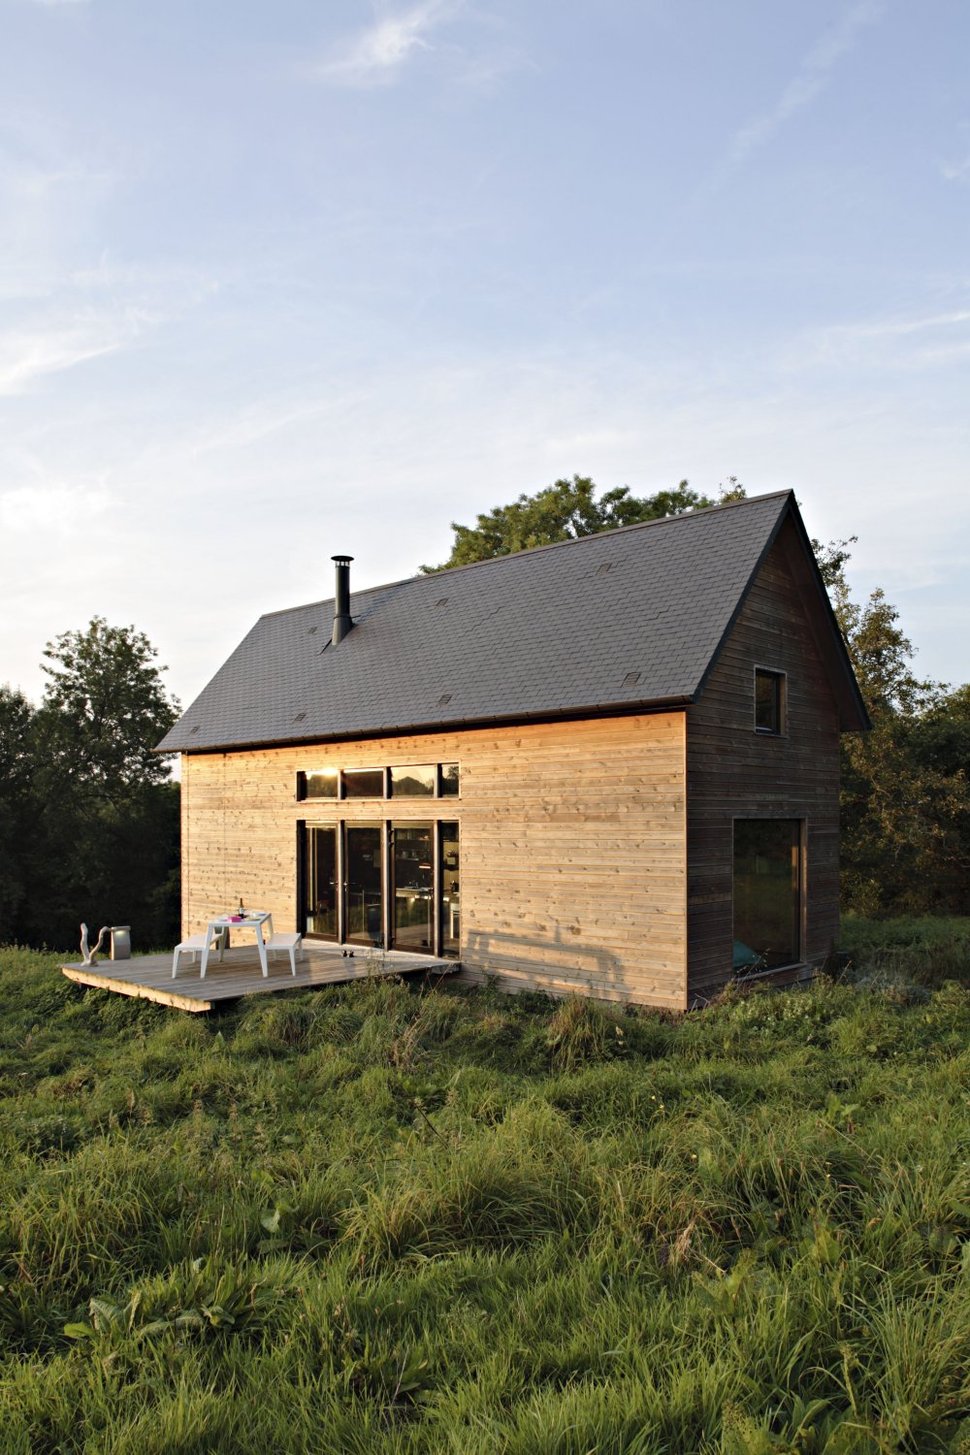 barn-style-weekend-cabin-embraces-simple-life-10a-exterior.jpg